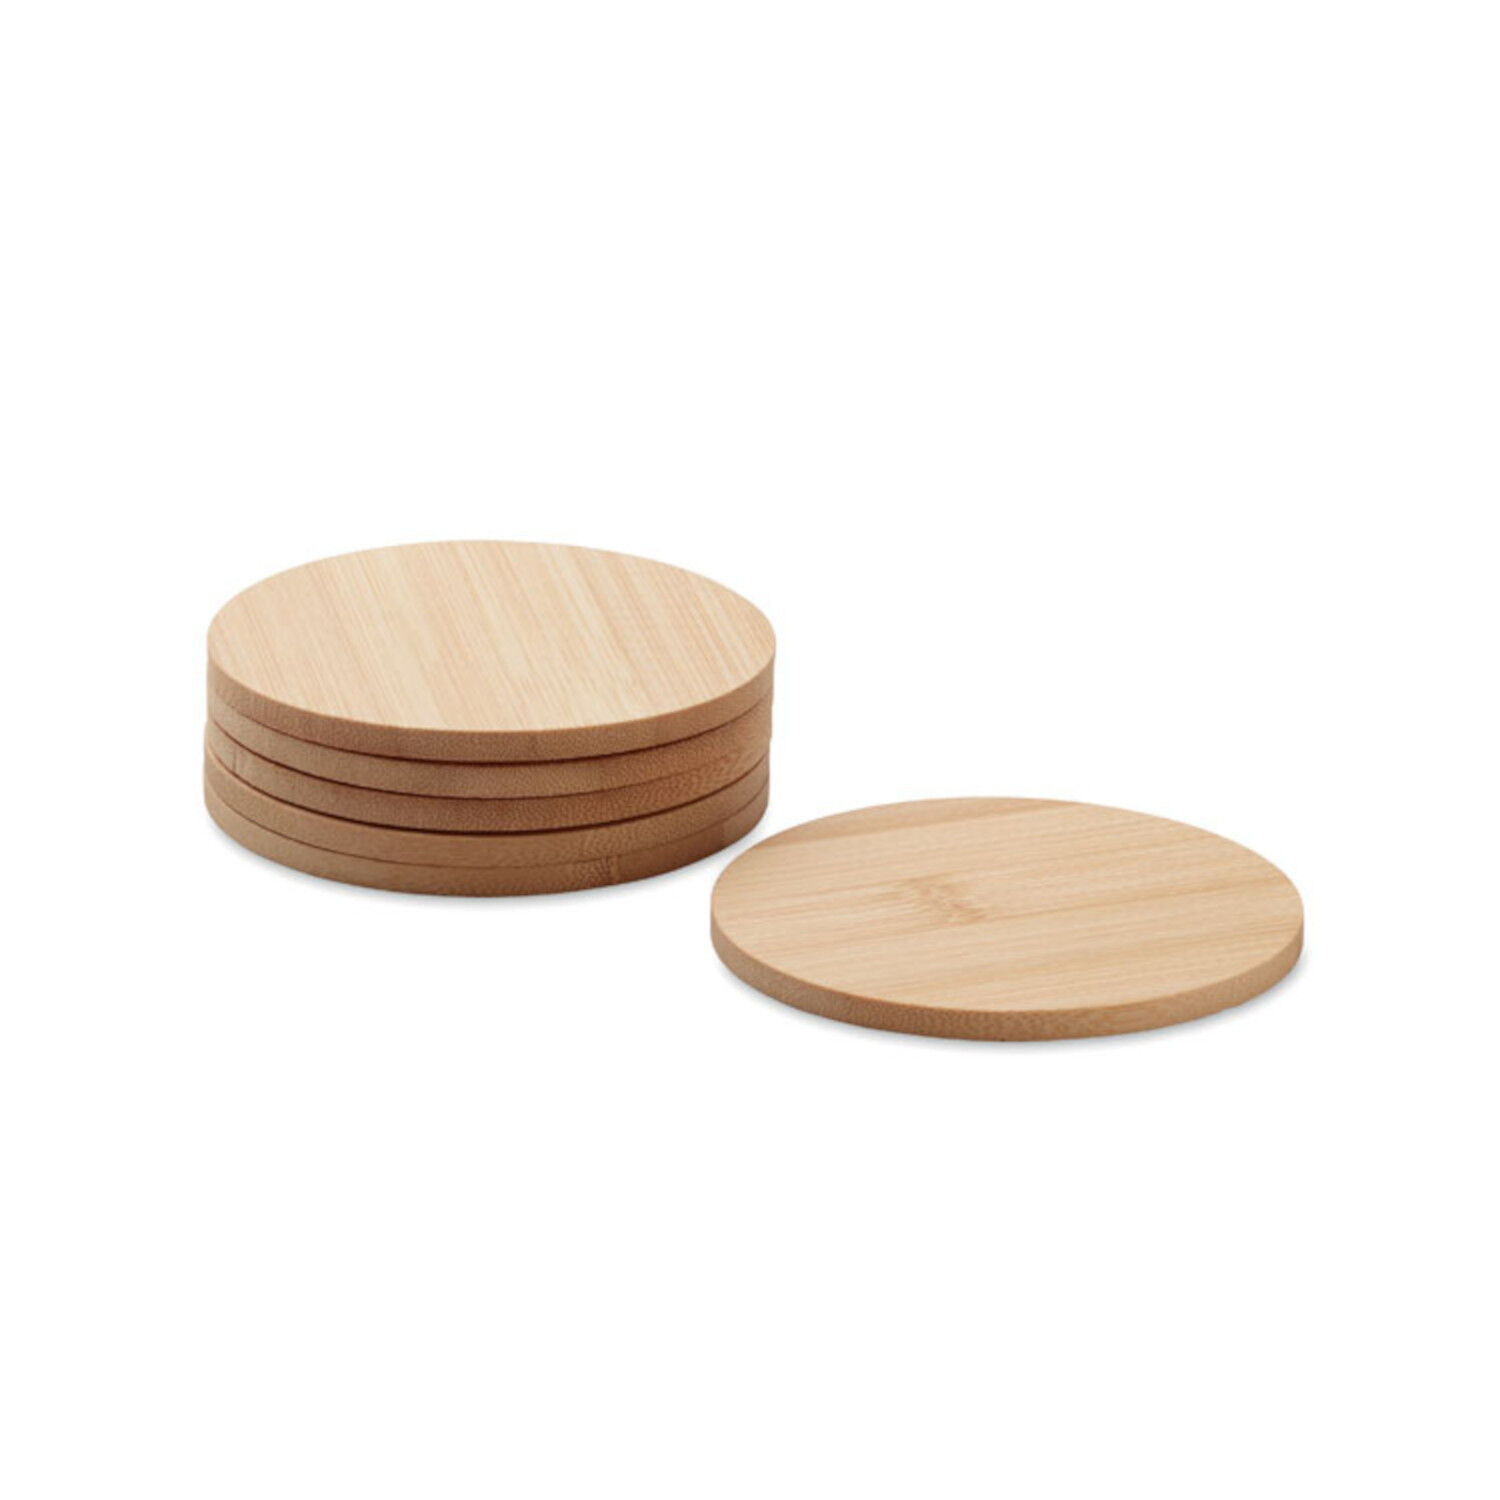 Set of Bamboo Coasters in a Cotton Bag